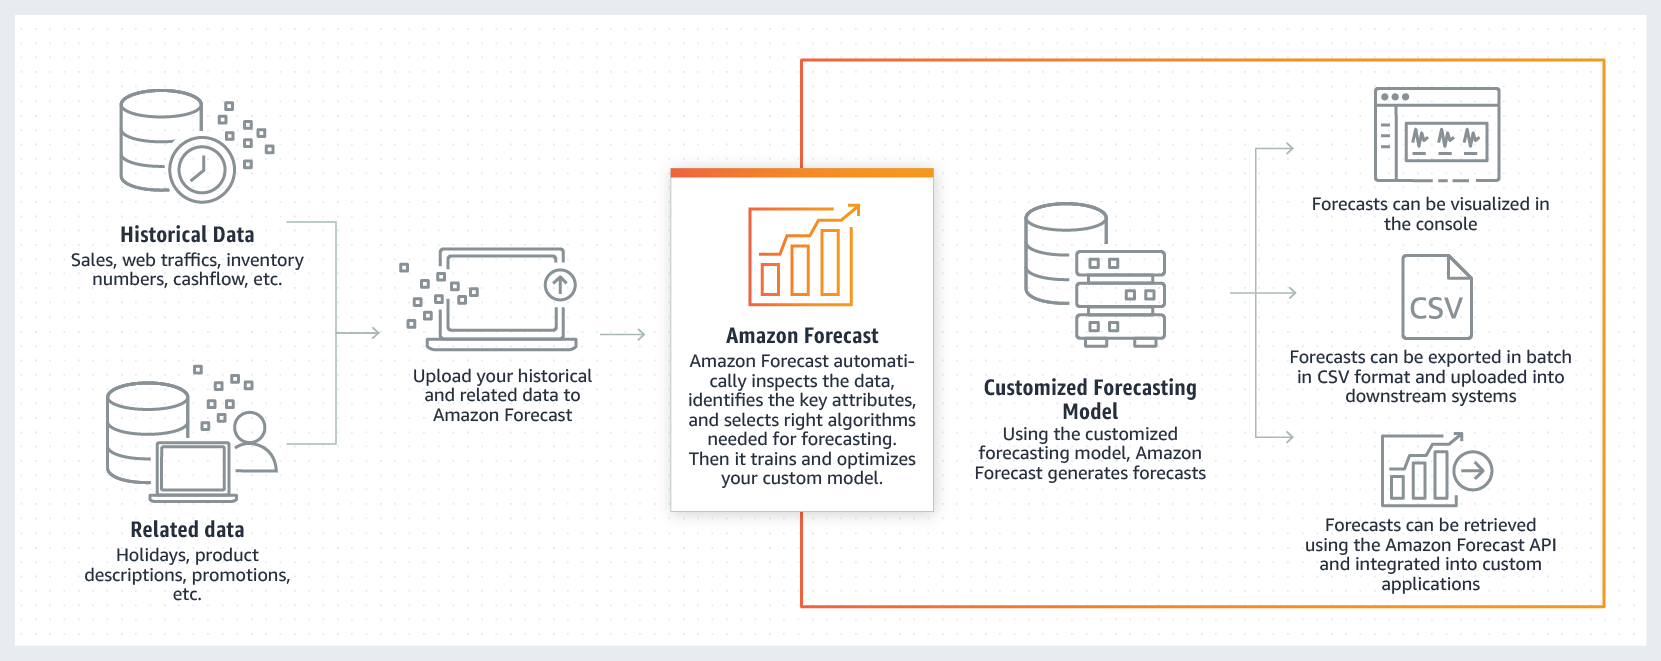 Aws Launches Amazon Forecast To Make Time Series Predictions